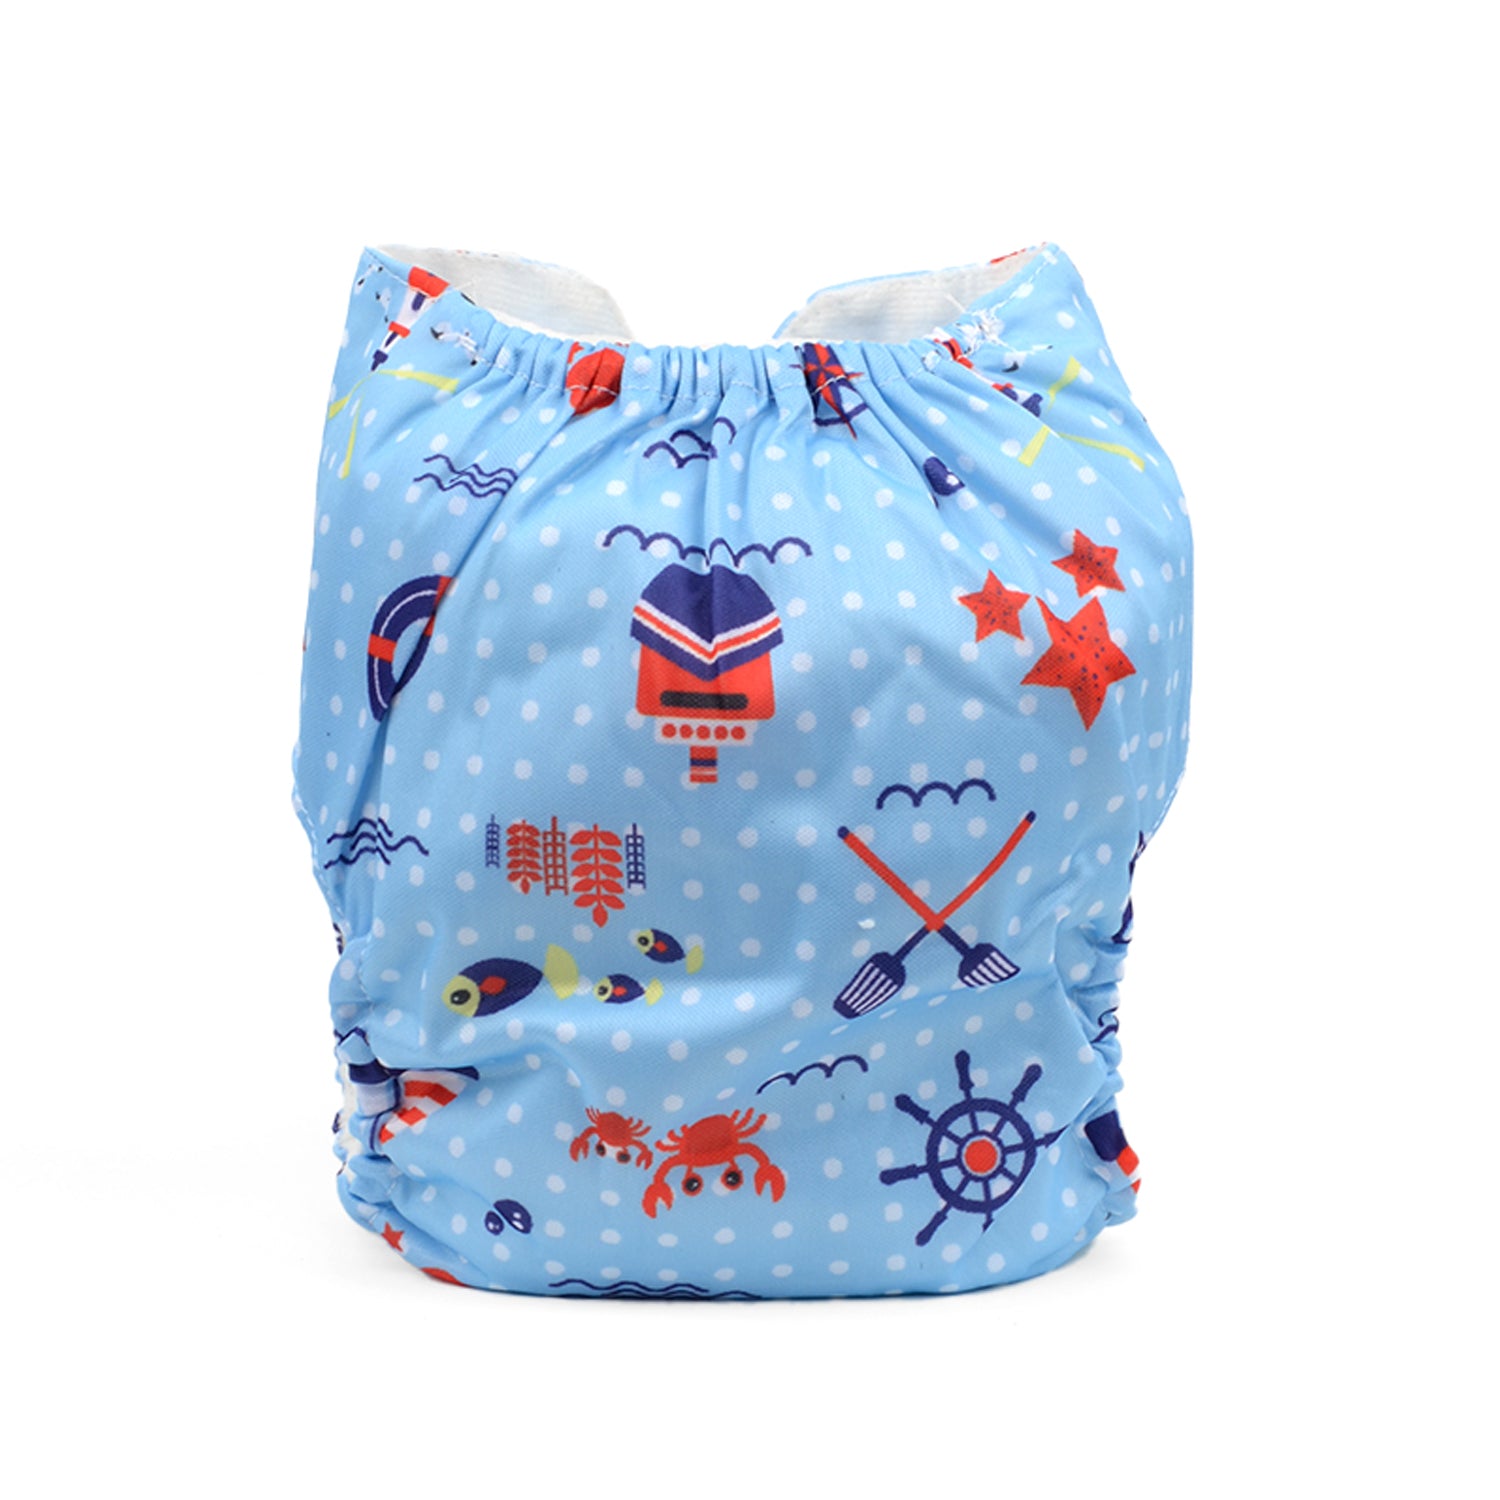 Baby Resusable Cotton Printed Pocket Diapers With 1 Insert | 0-12 Months | Pack of 3